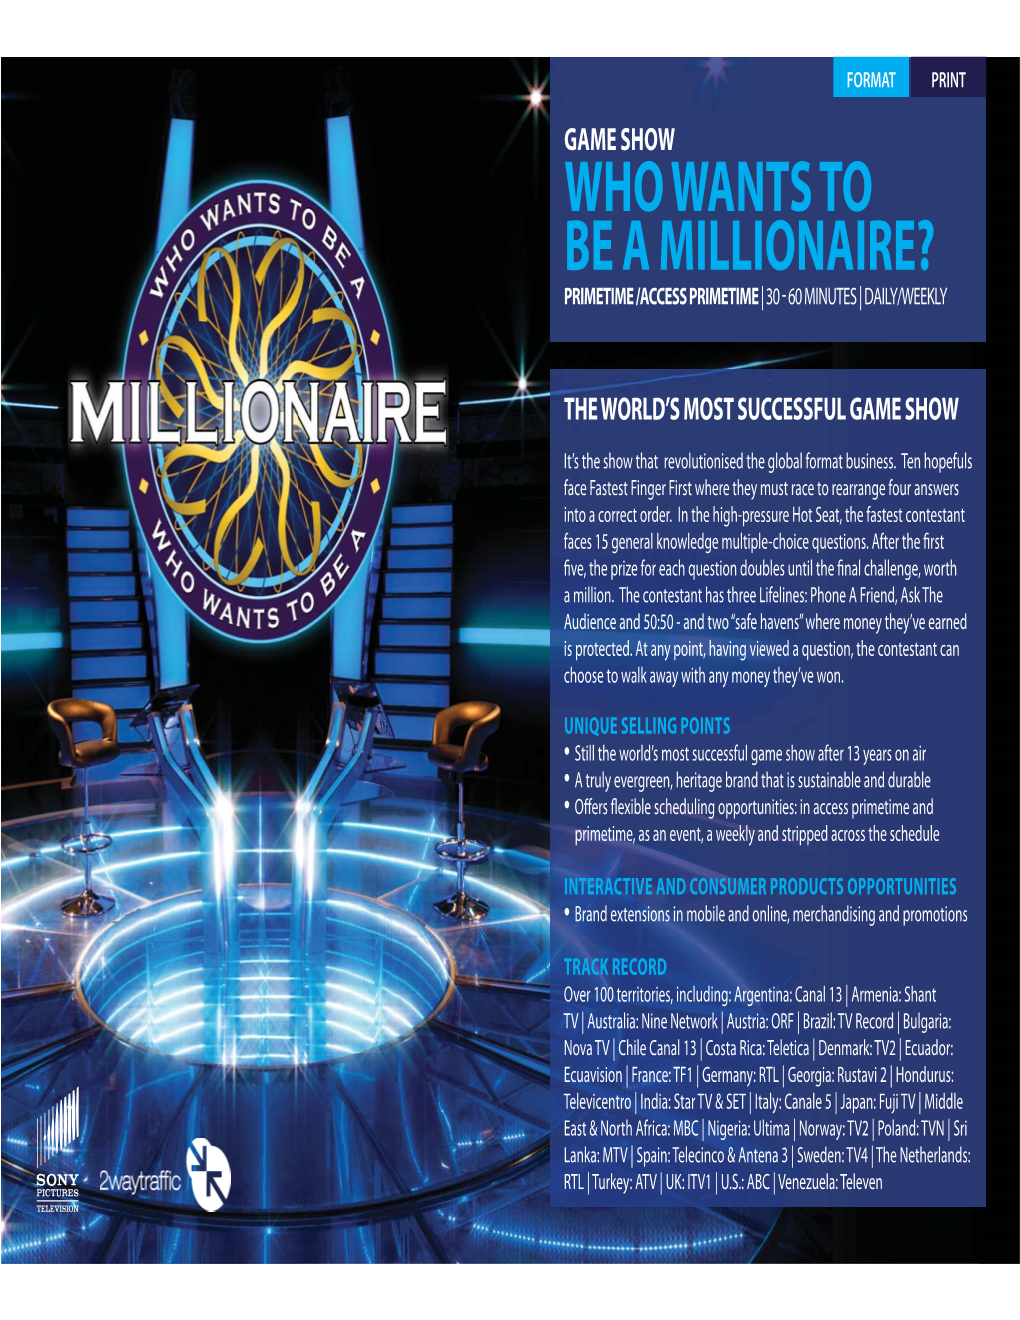 Who Wants to Be a Millionaire? Primetime /Access Primetime | 30 - 60 Minutes | Daily/Weekly